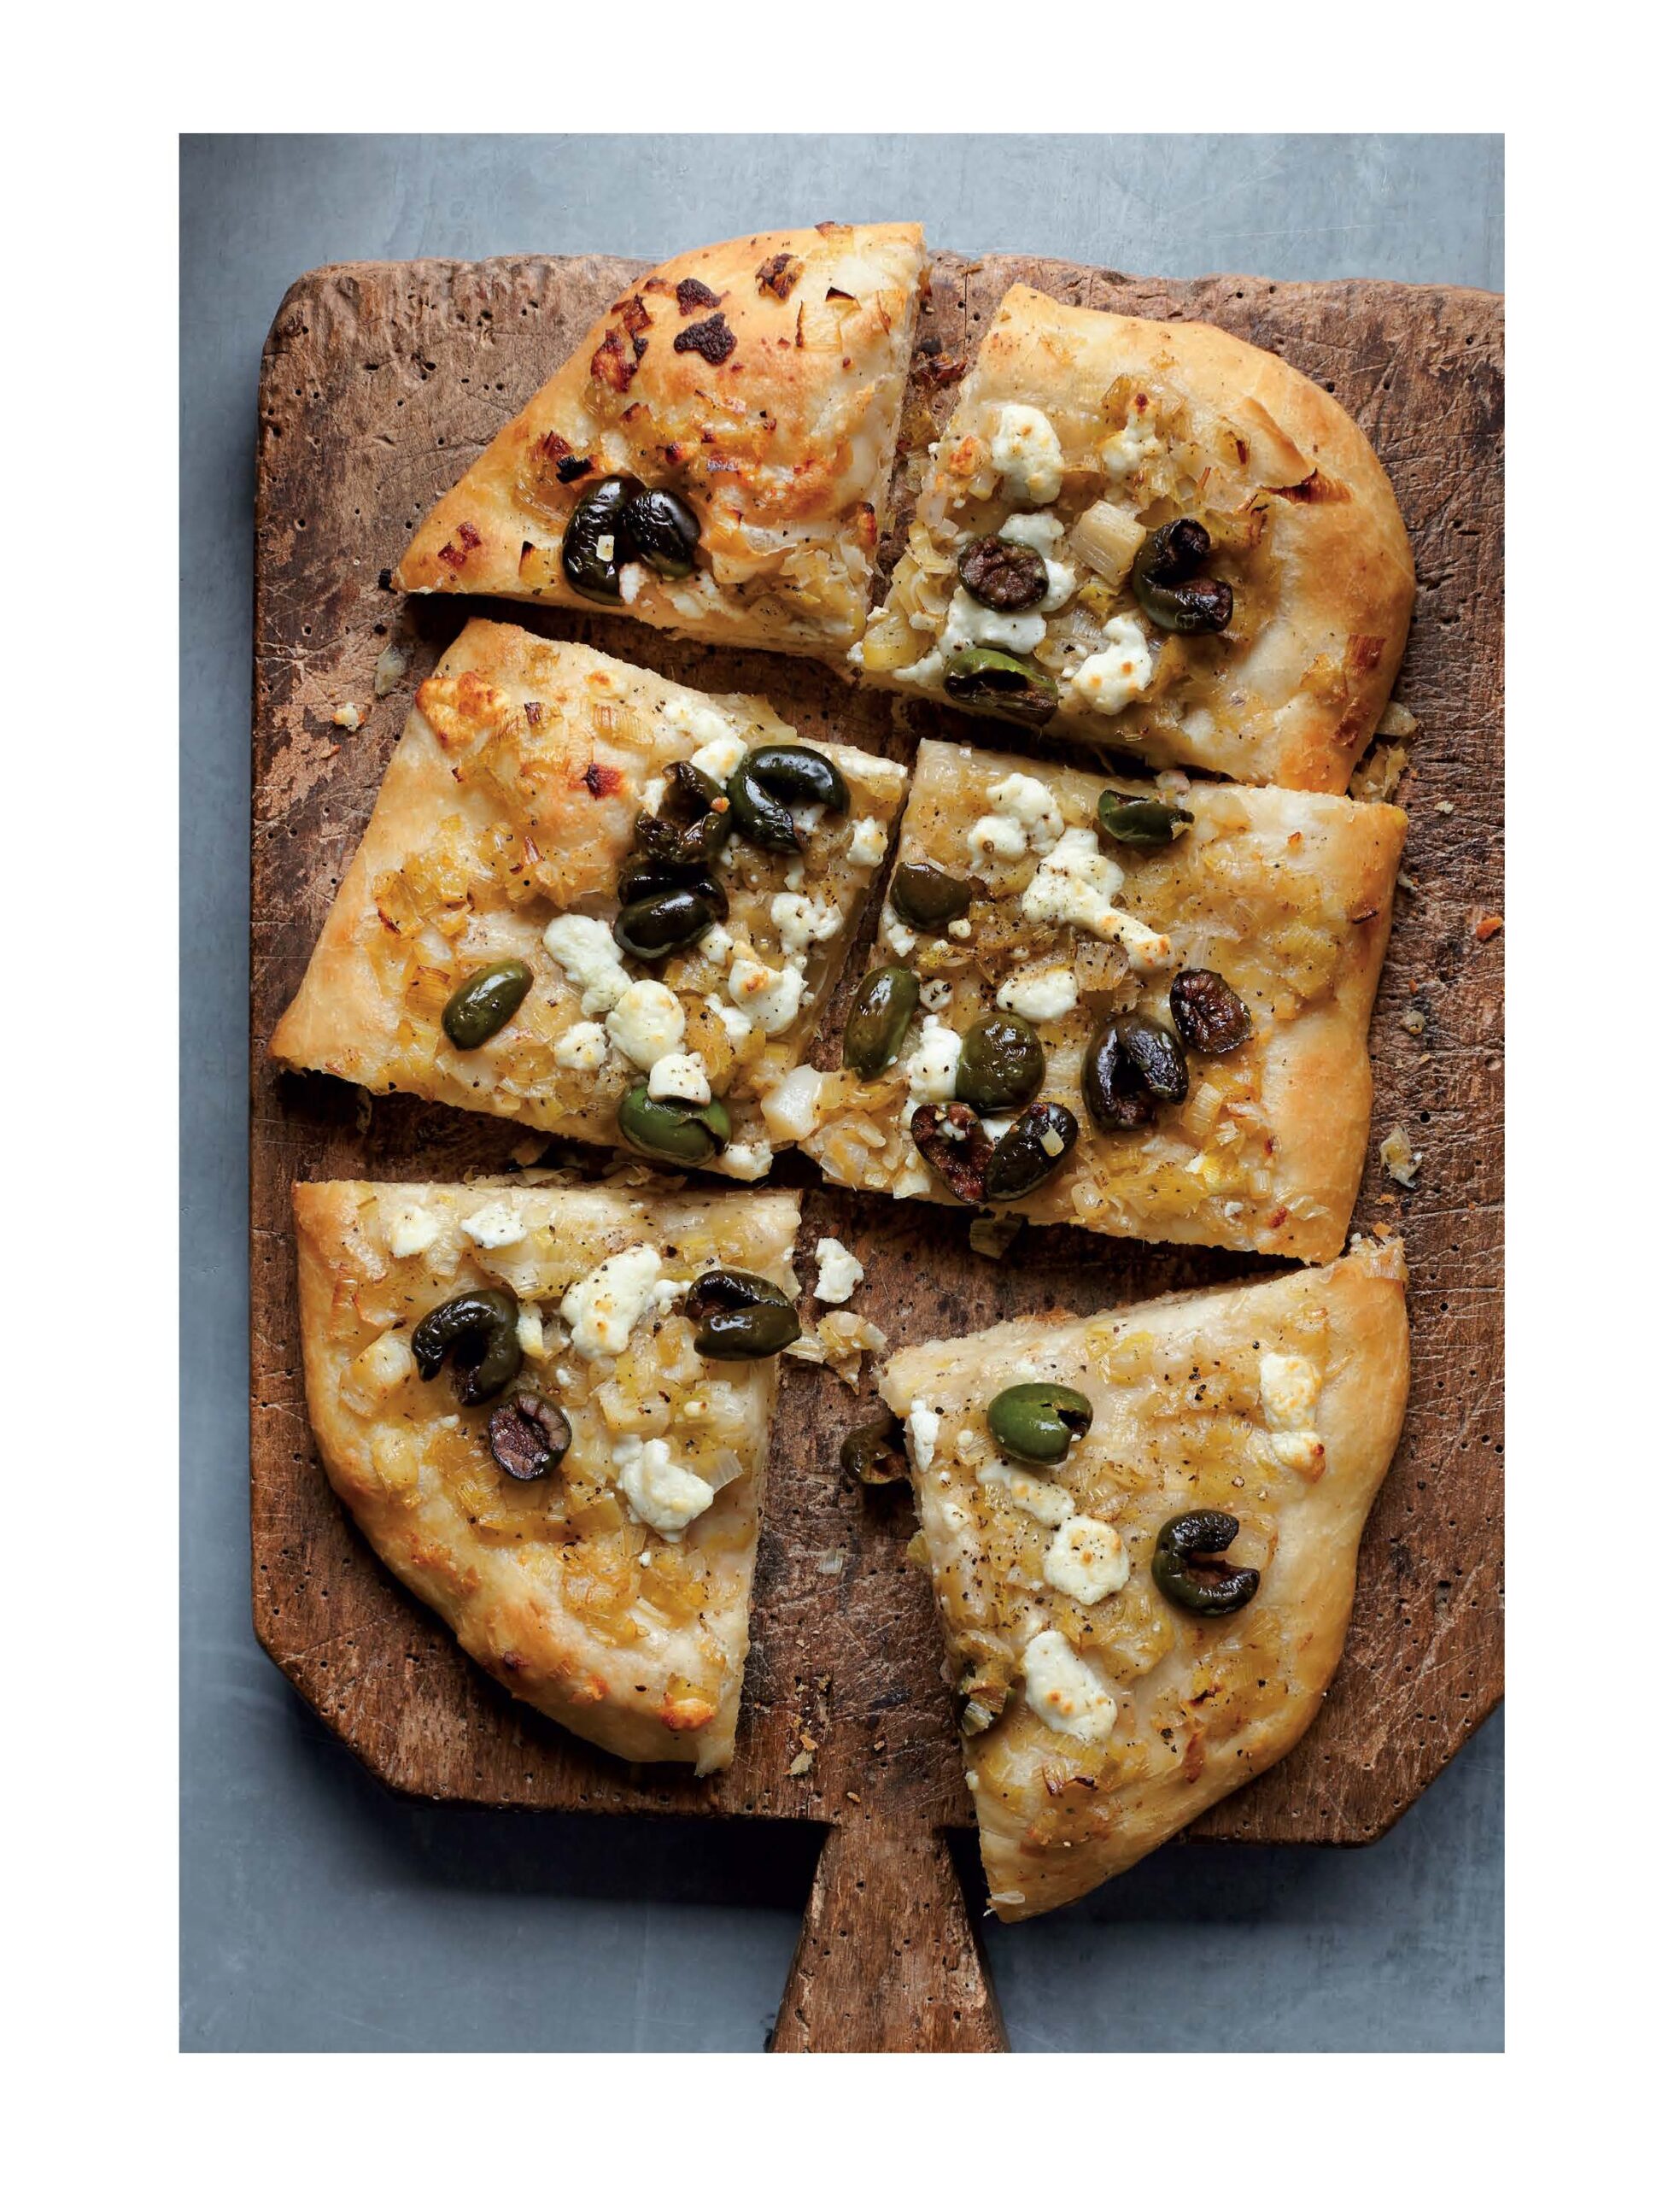 Recipe: Caramelized Leek Flatbread With Black Olives And Soft Cheese